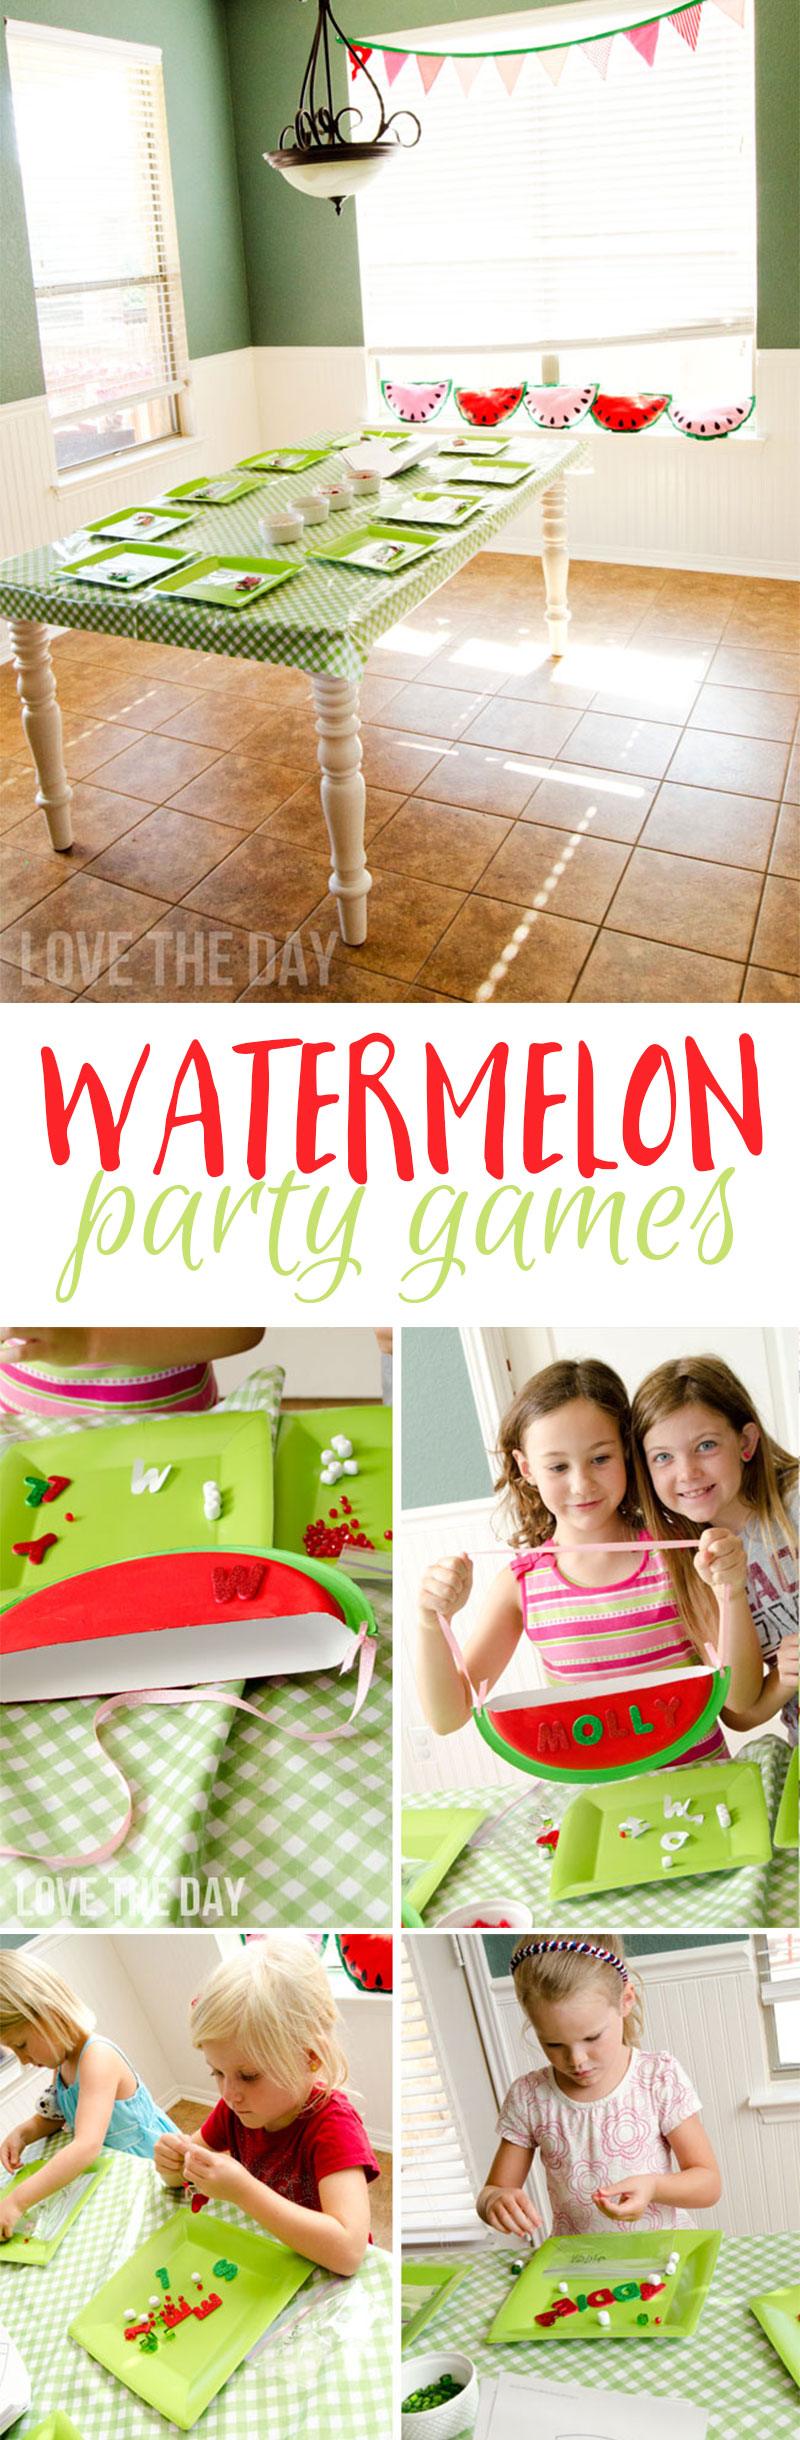 Watermelon Party Activities by Lindi Haws of Love The Day